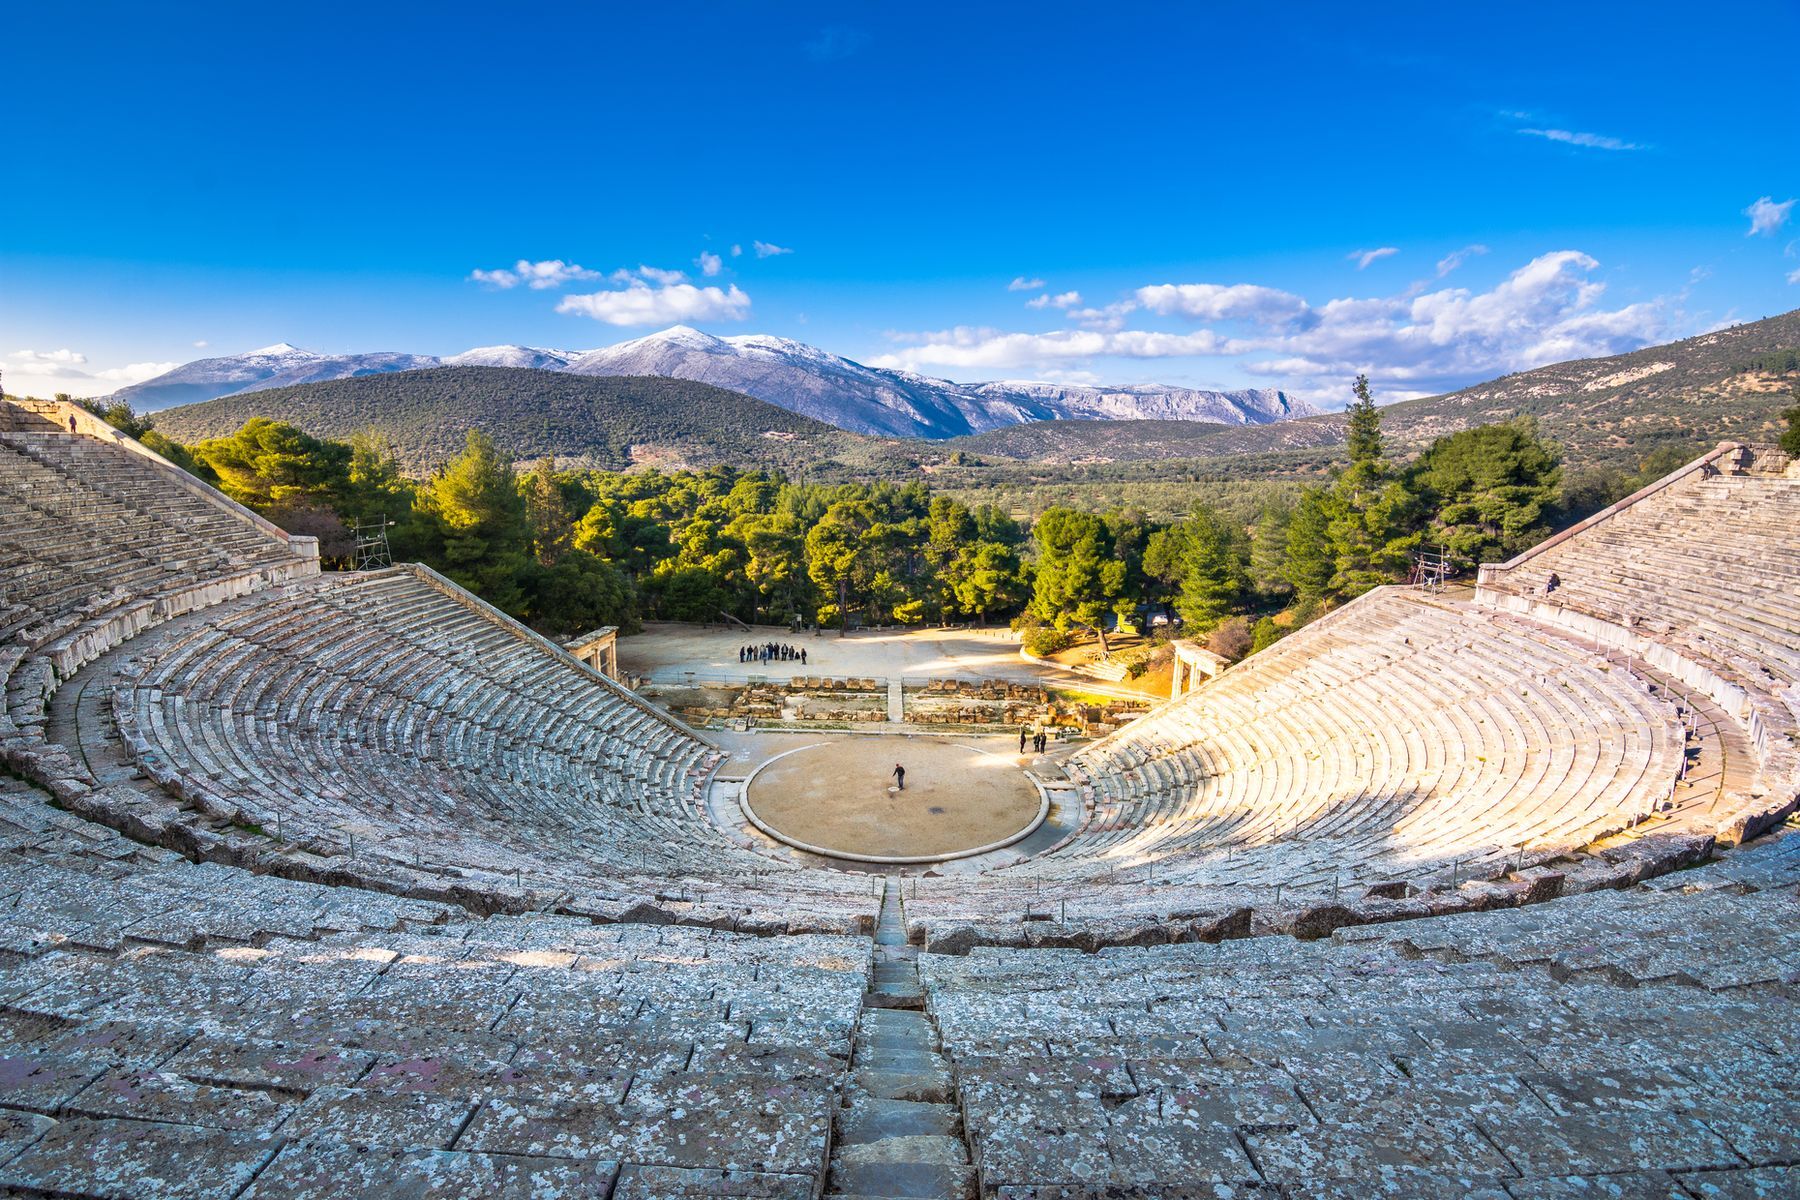 Cradle of Greek mythology, the sublime <a href="https://www.discovergreece.com/peloponnese" rel="noreferrer noopener">Peloponnese</a> peninsula is located in southern Greece. Discover its treasures with a visit to <a href="https://historyandarchaeologyonline.com/the-citadel-of-mycenae/" rel="noreferrer noopener">Mycenae</a>, whose citadel ruins testify to the grandeur of the Mycenaean civilization. Also stop by <a href="https://www.greeka.com/peloponnese/epidaurus/sightseeing/epidaurus-ancient-theatre/" rel="noreferrer noopener">Epidaurus’s ancient theatre</a> and the pretty town of <a href="https://greeceinsiders.travel/day-trip-mycenae-nafplio/" rel="noreferrer noopener">Nafplio</a>. In Olympia, the sacred archaeological site of the <a href="https://visitworldheritage.com/en/eu/archaeological-site-of-olympia-greece/7d32eb45-1582-496a-b5b0-338b417b3a80" rel="noreferrer noopener">Olympic Games</a> will transport visitors back to antiquity, while olive aficionados shouldn’t miss the town of <a href="https://www.visitgreece.gr/mainland/peloponnese/kalamata/" rel="noreferrer noopener">Kalamata</a> for delicious tastings.